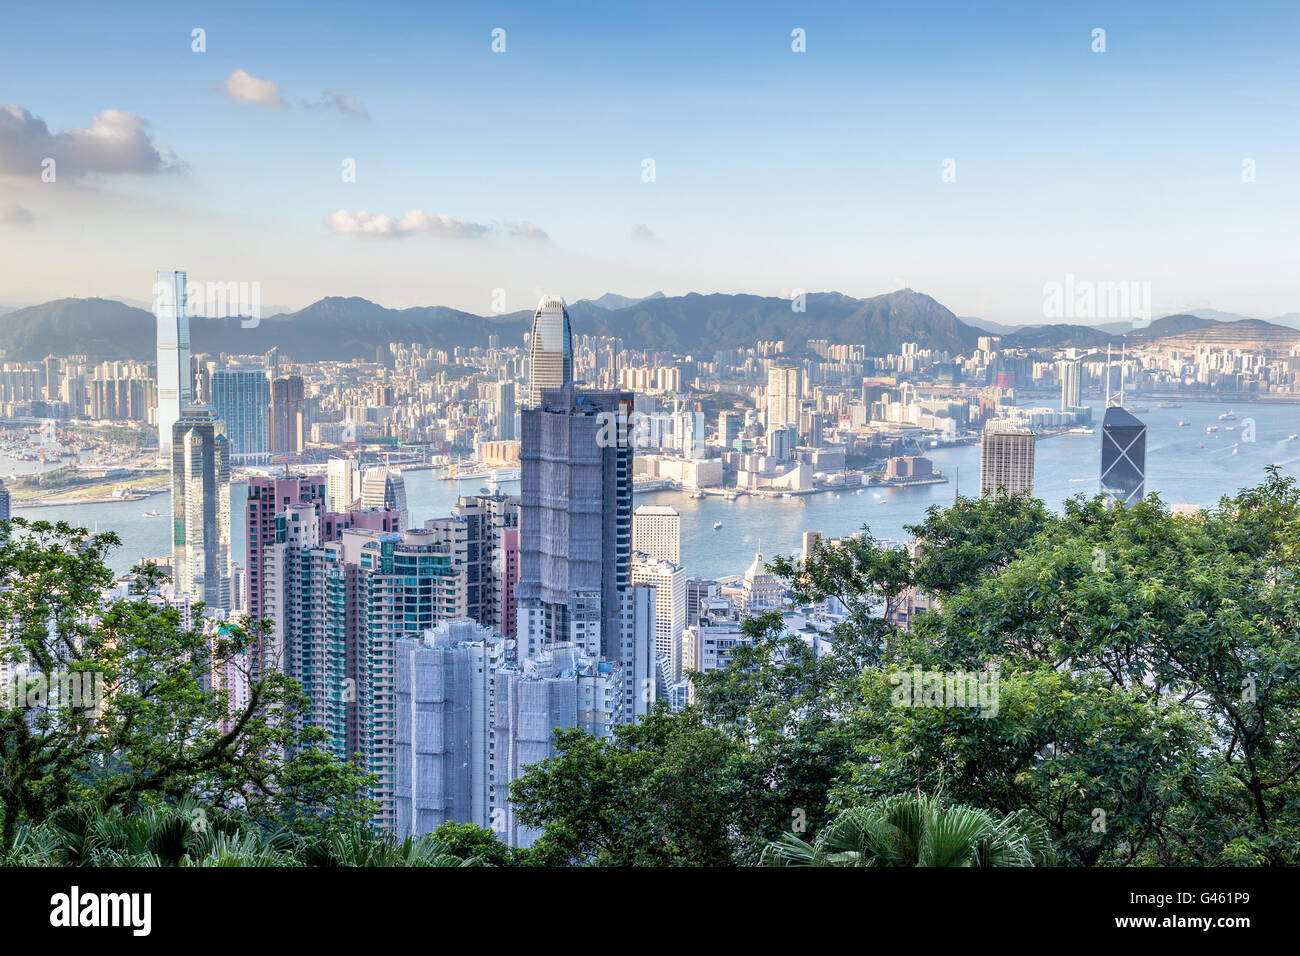 Aerial shot of Victoria Harbor as viewed atop Victoria Peak. This is Hong Kong's famous financial downtown district. Stock Photo